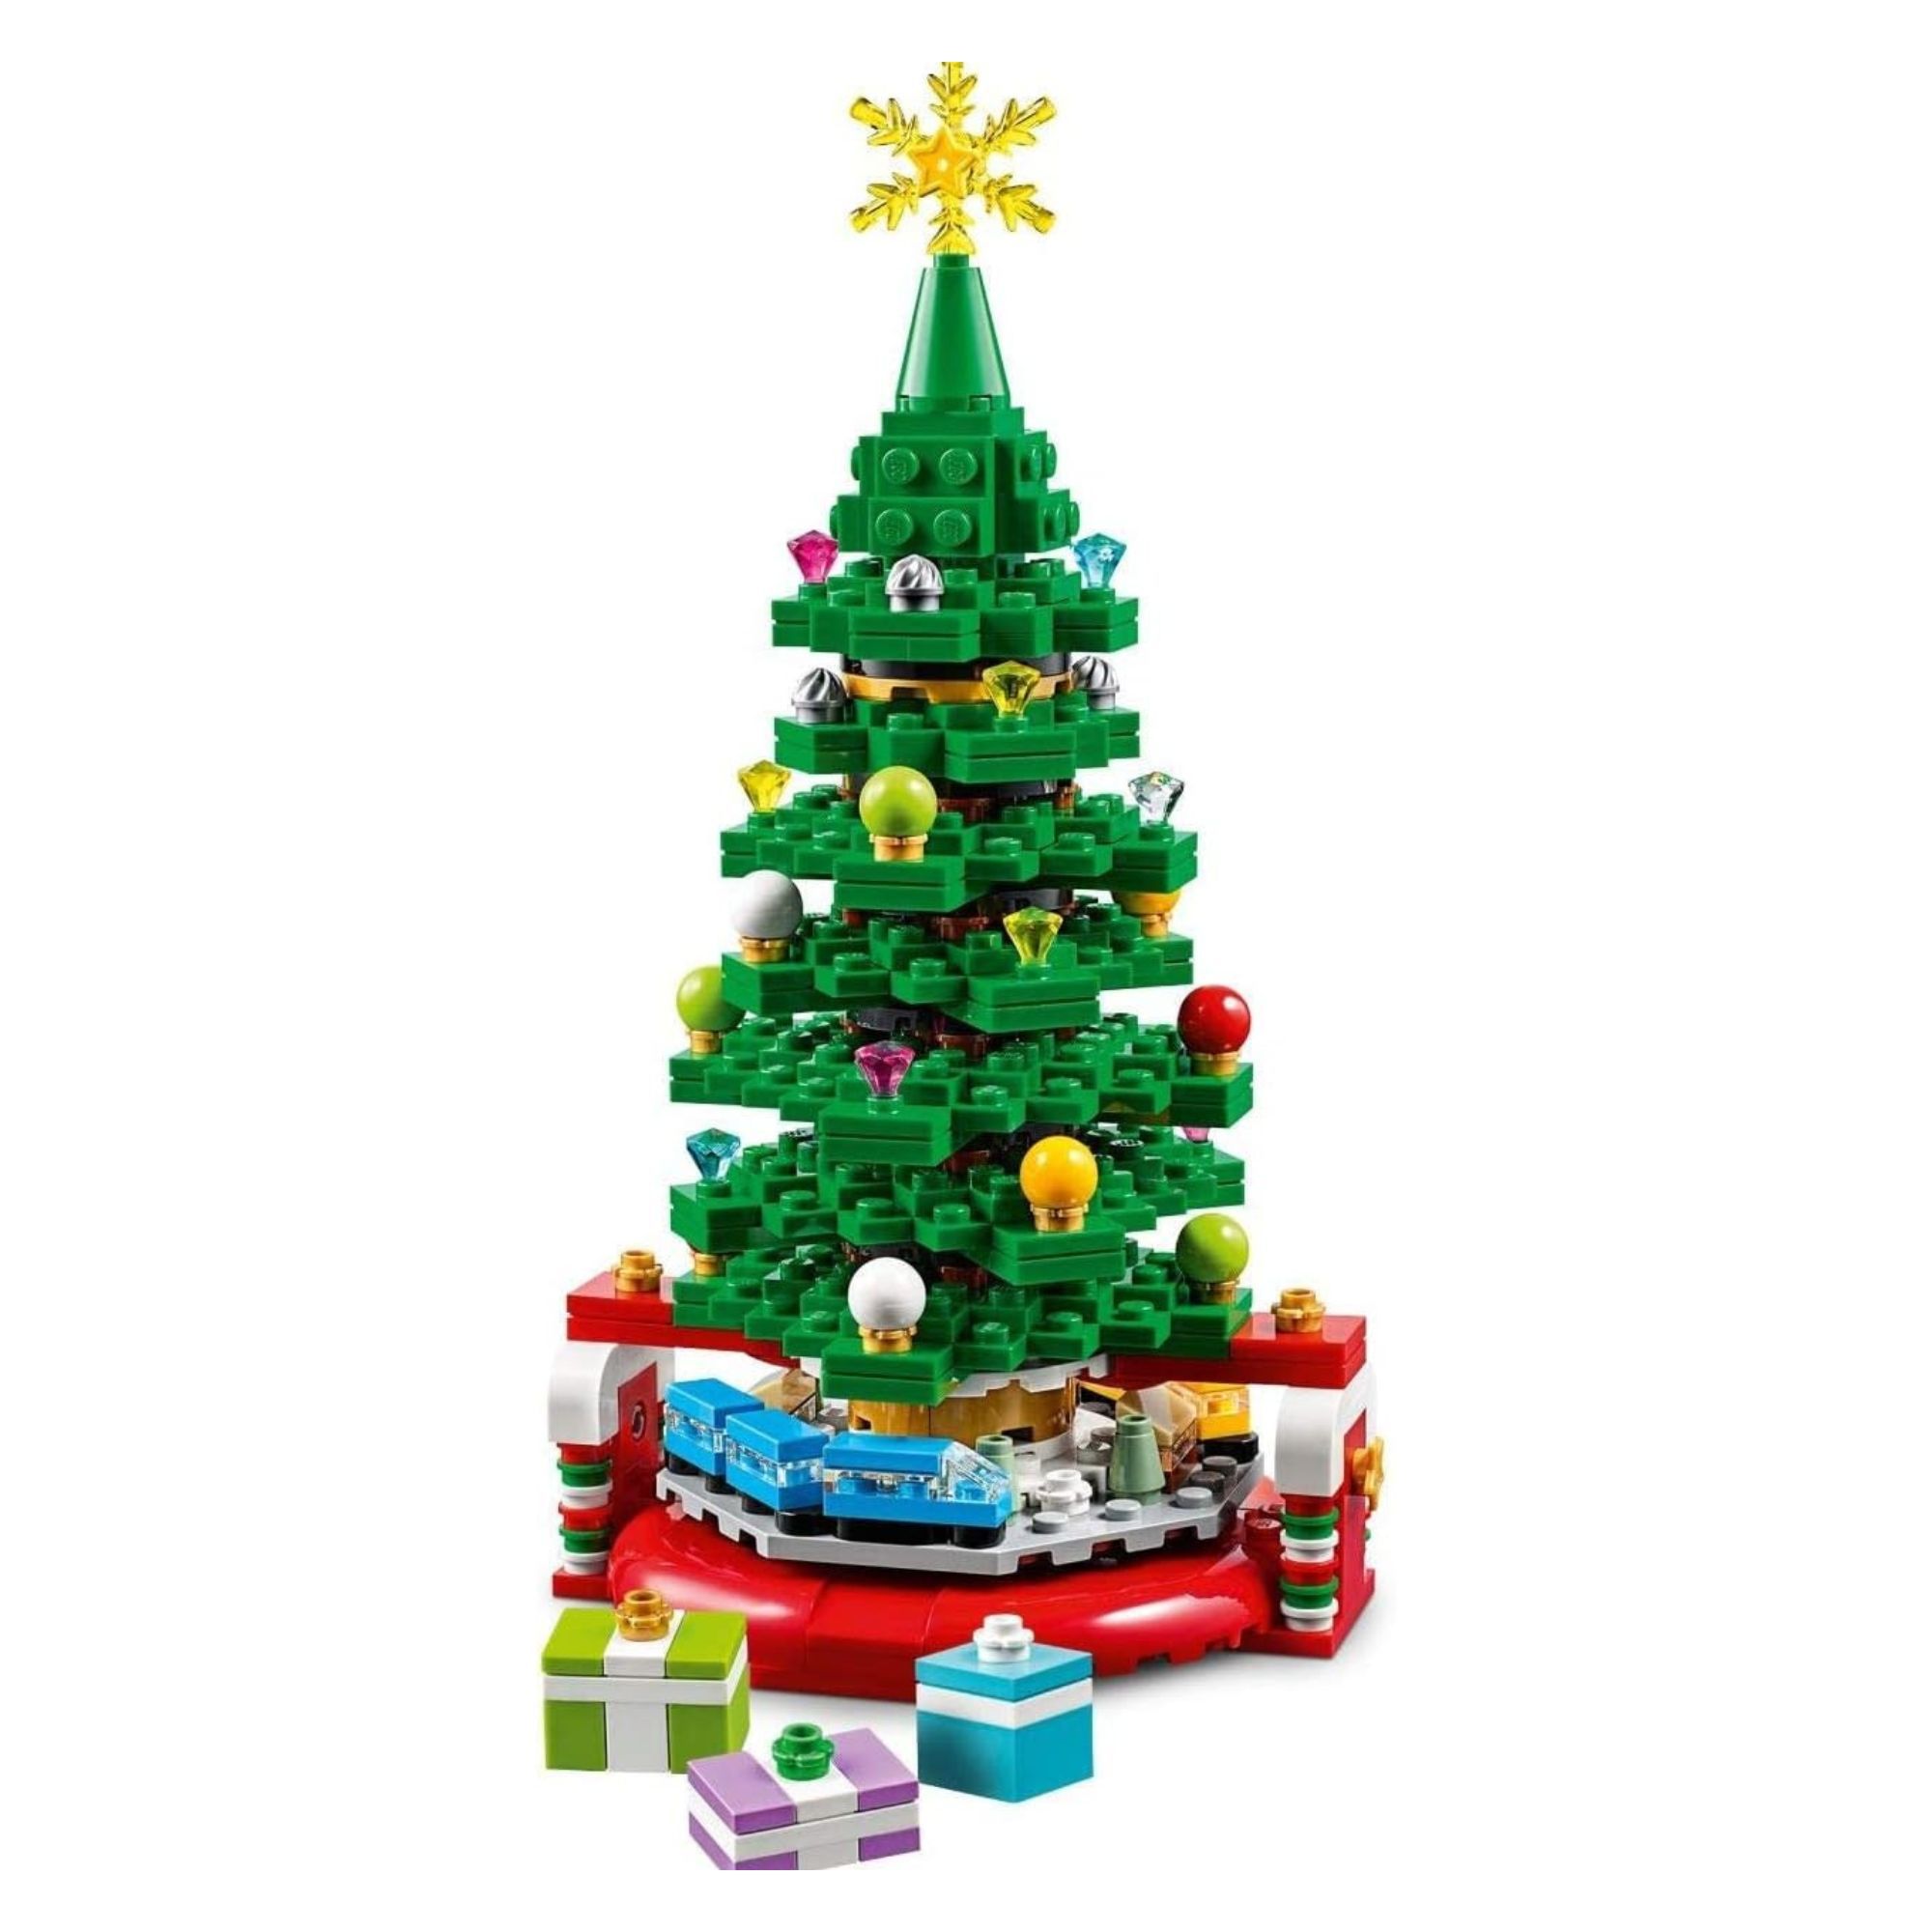 Product still of the LEGO Christmas Tree on a white background